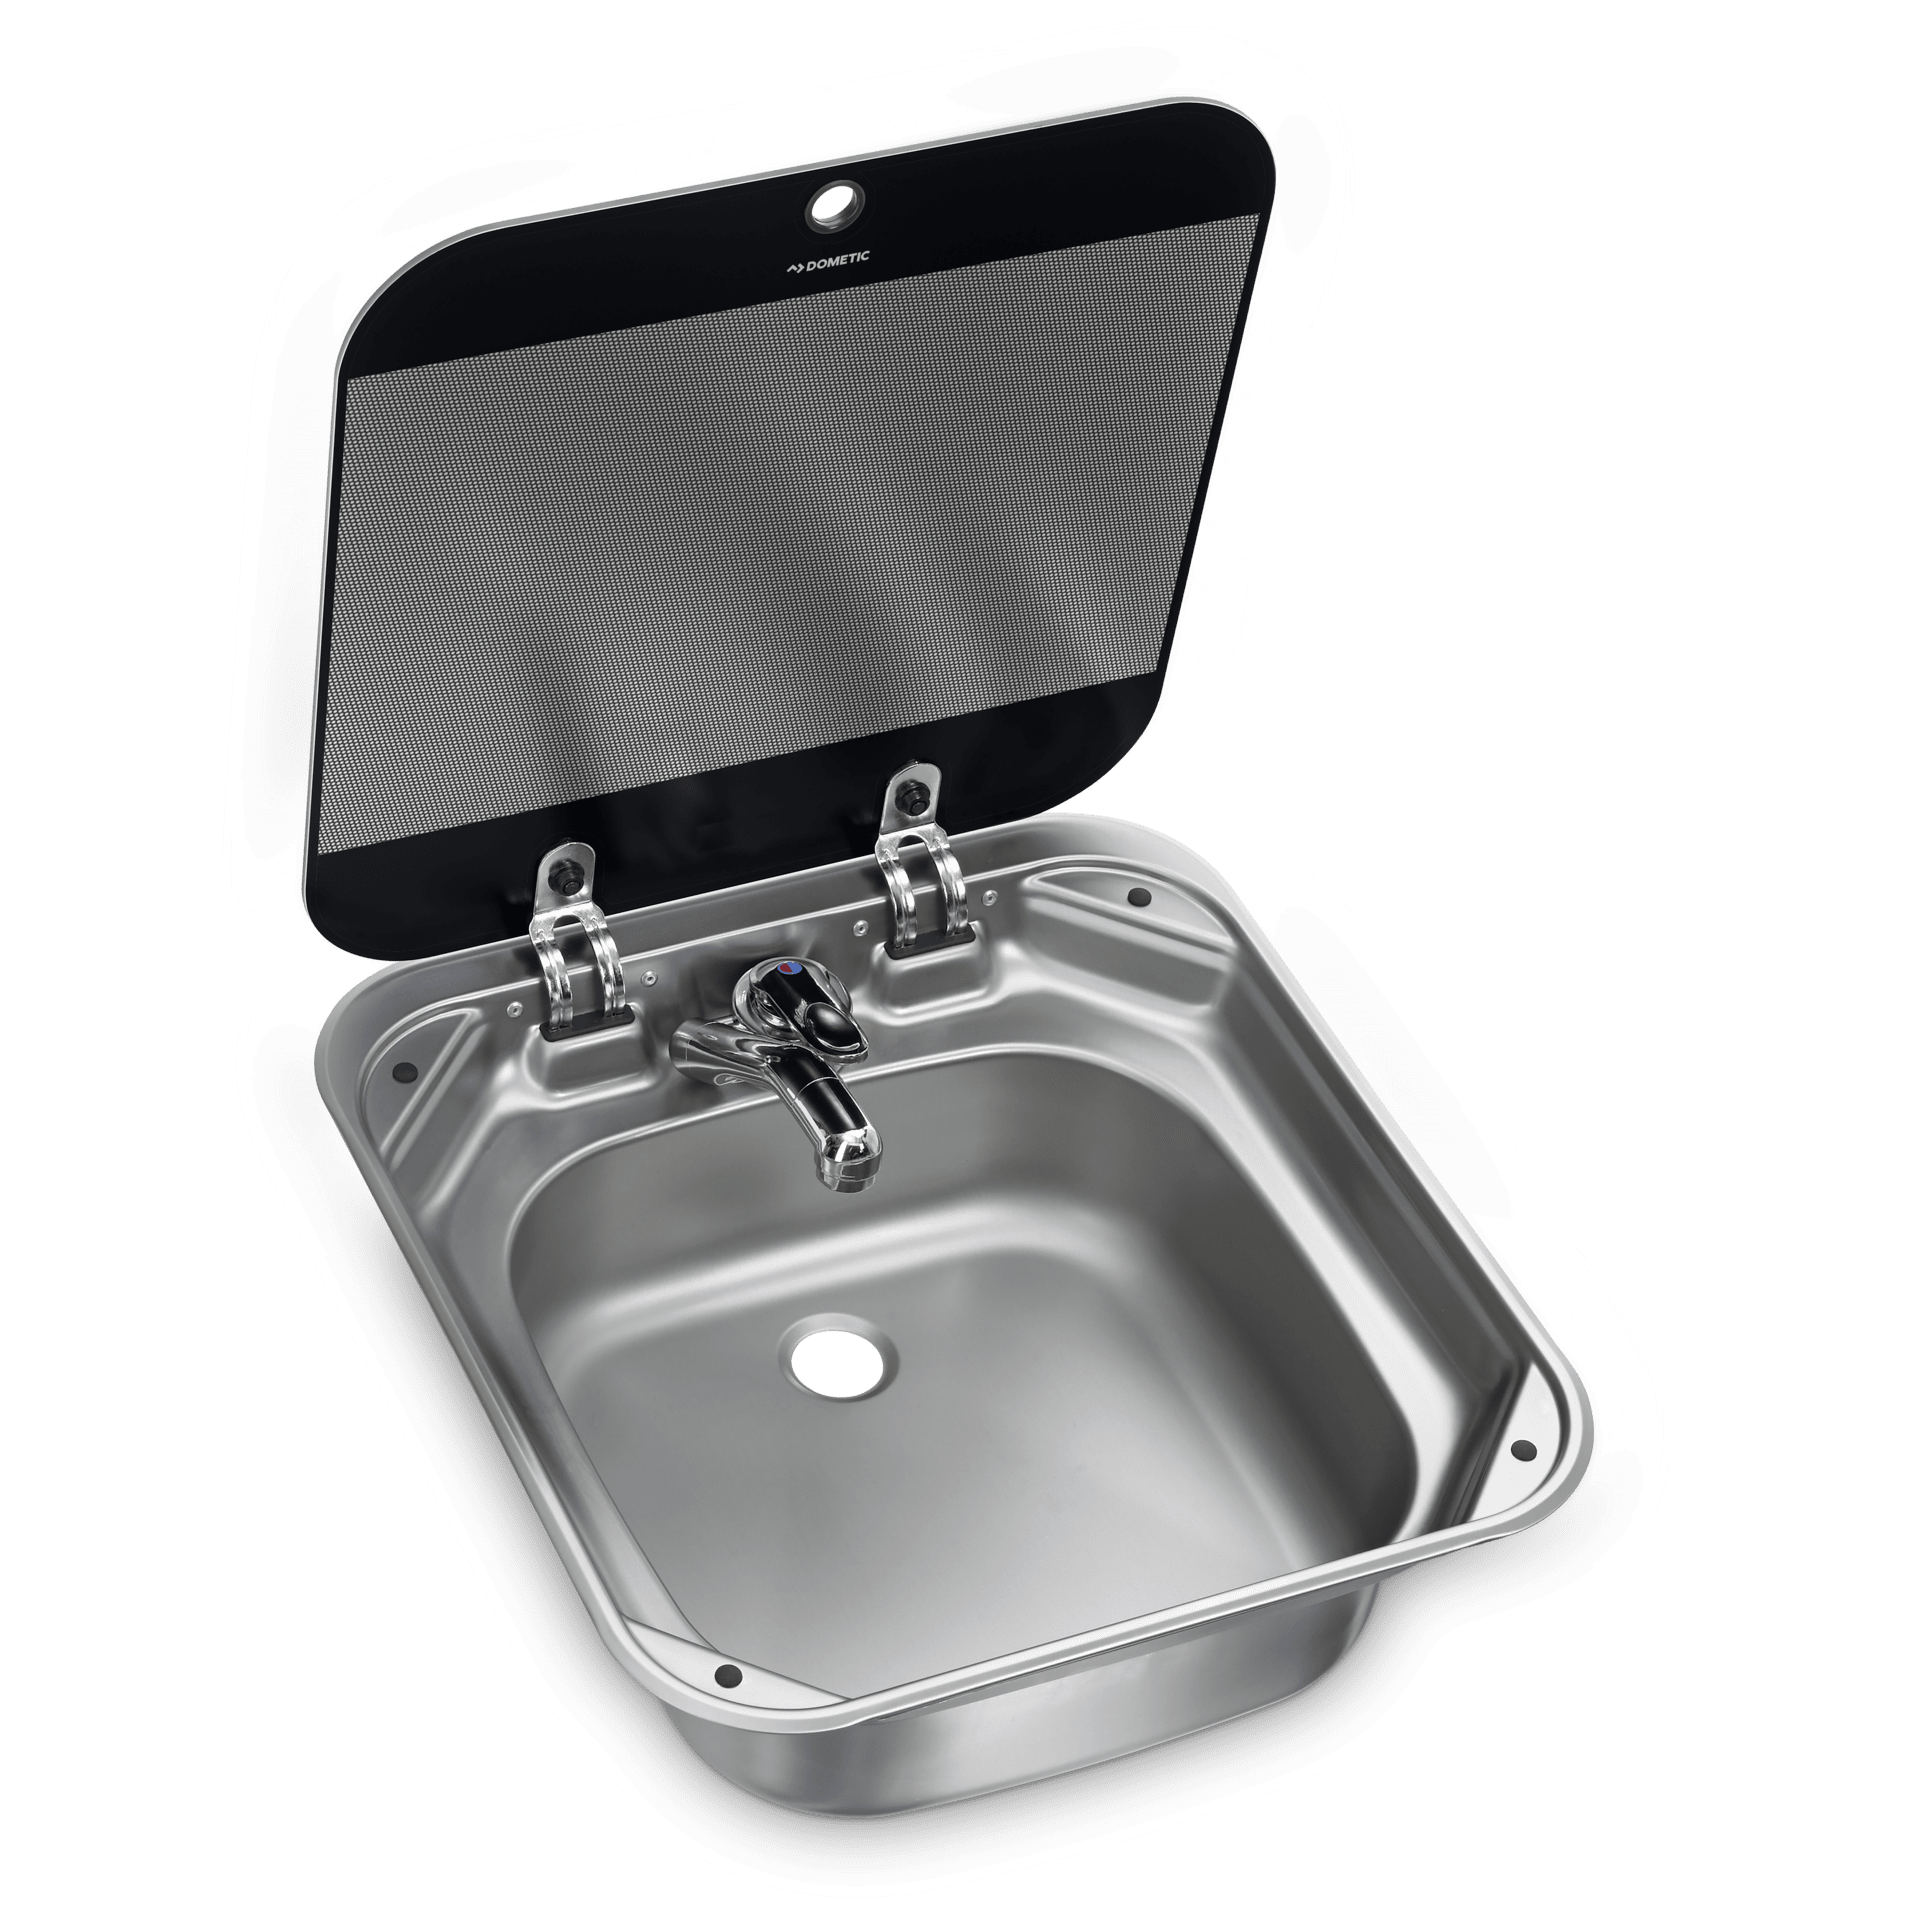 dometic-sng-4244-square-sink-with-glass-lid-420-x-440-mm-dometic